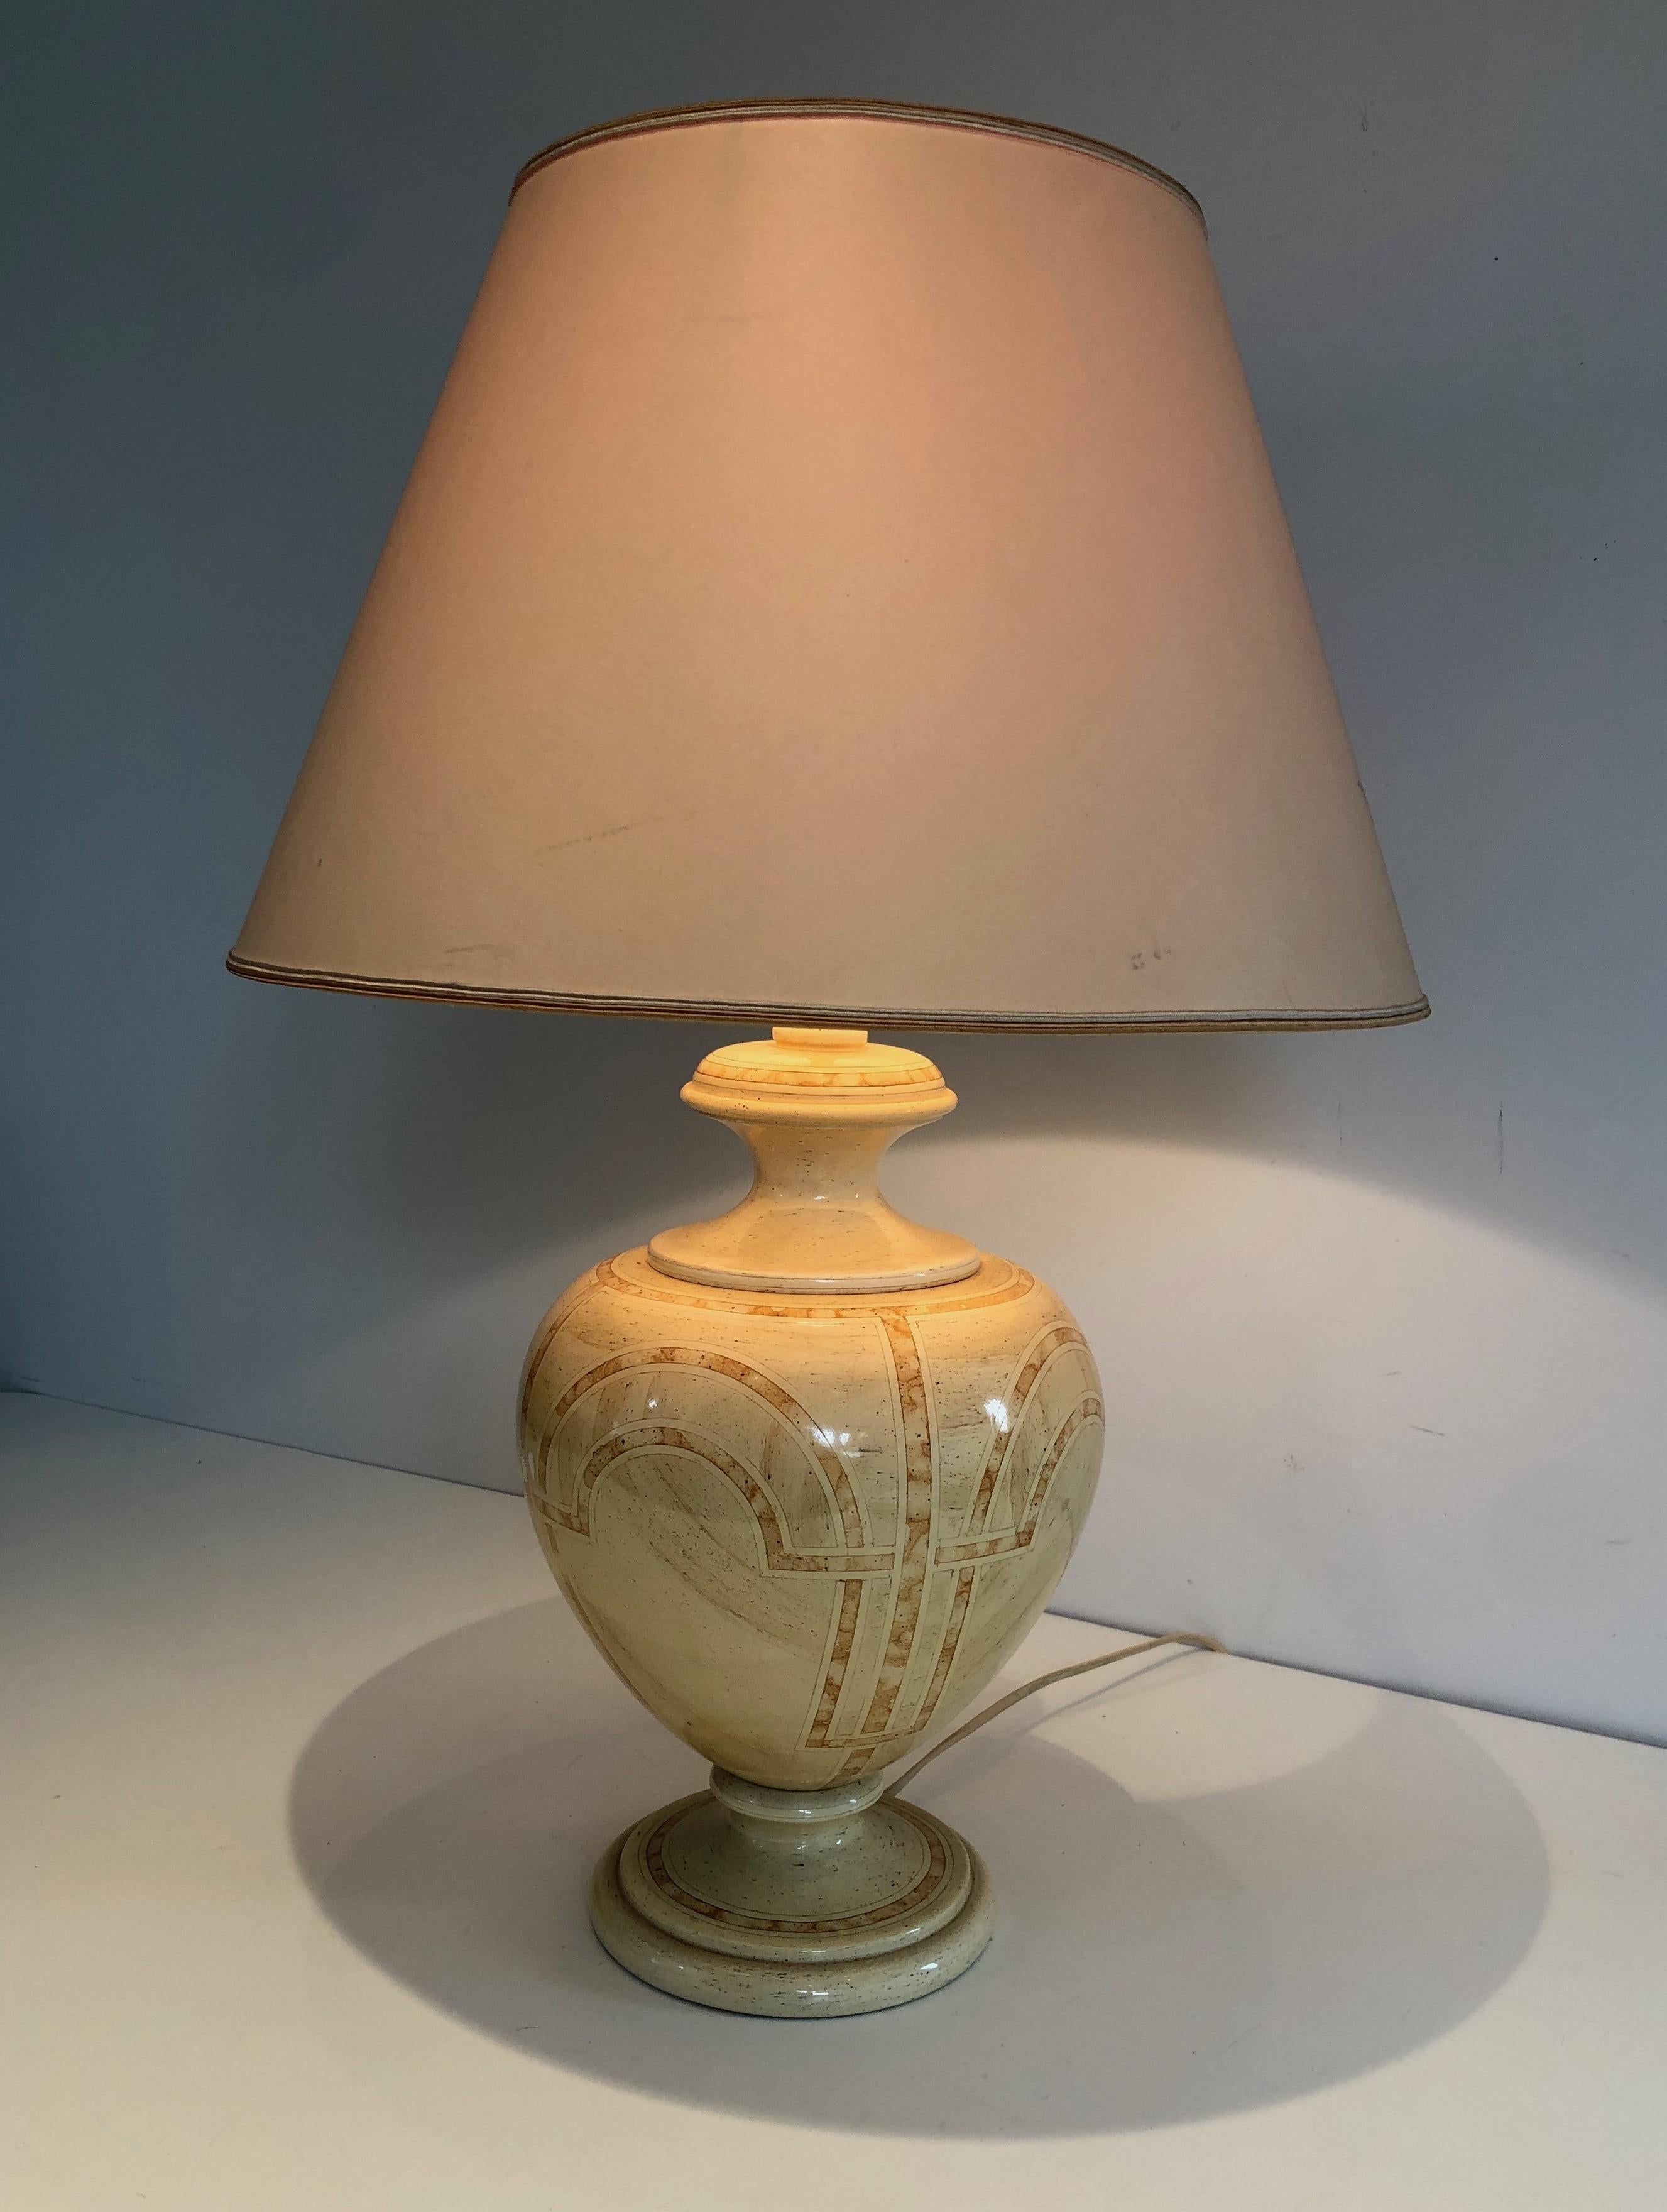 Eggshell Lacquered Table Lamp with Interlacing Decors, French Work, circa 1970 For Sale 6